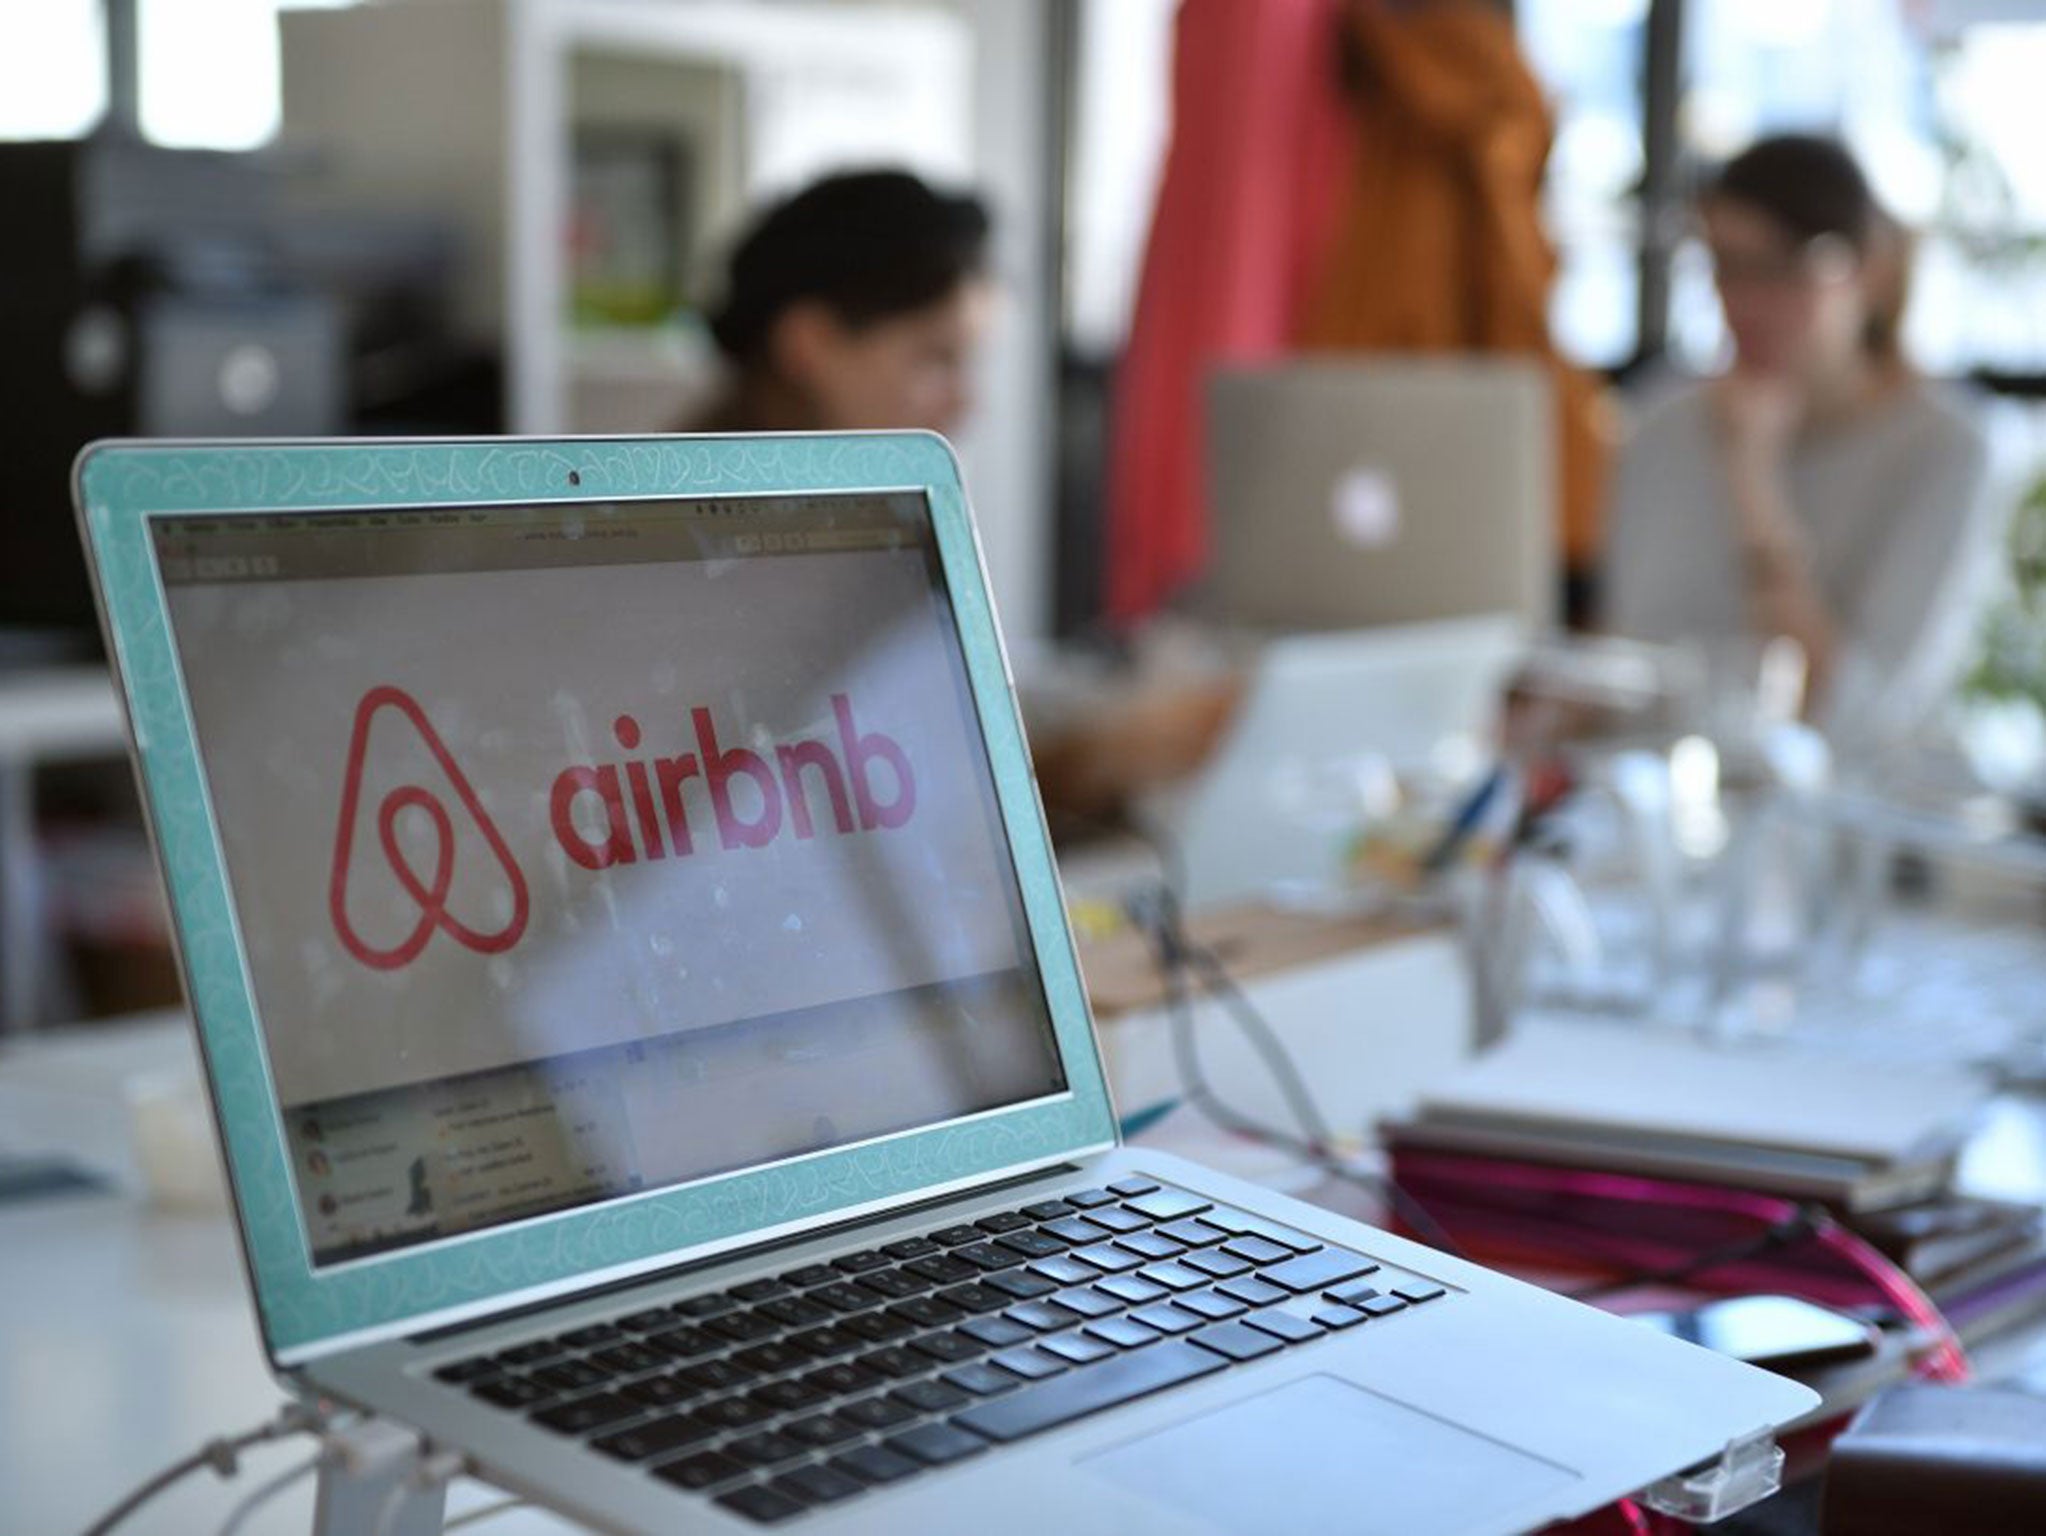 Airbnb is preparing to go public with its stock